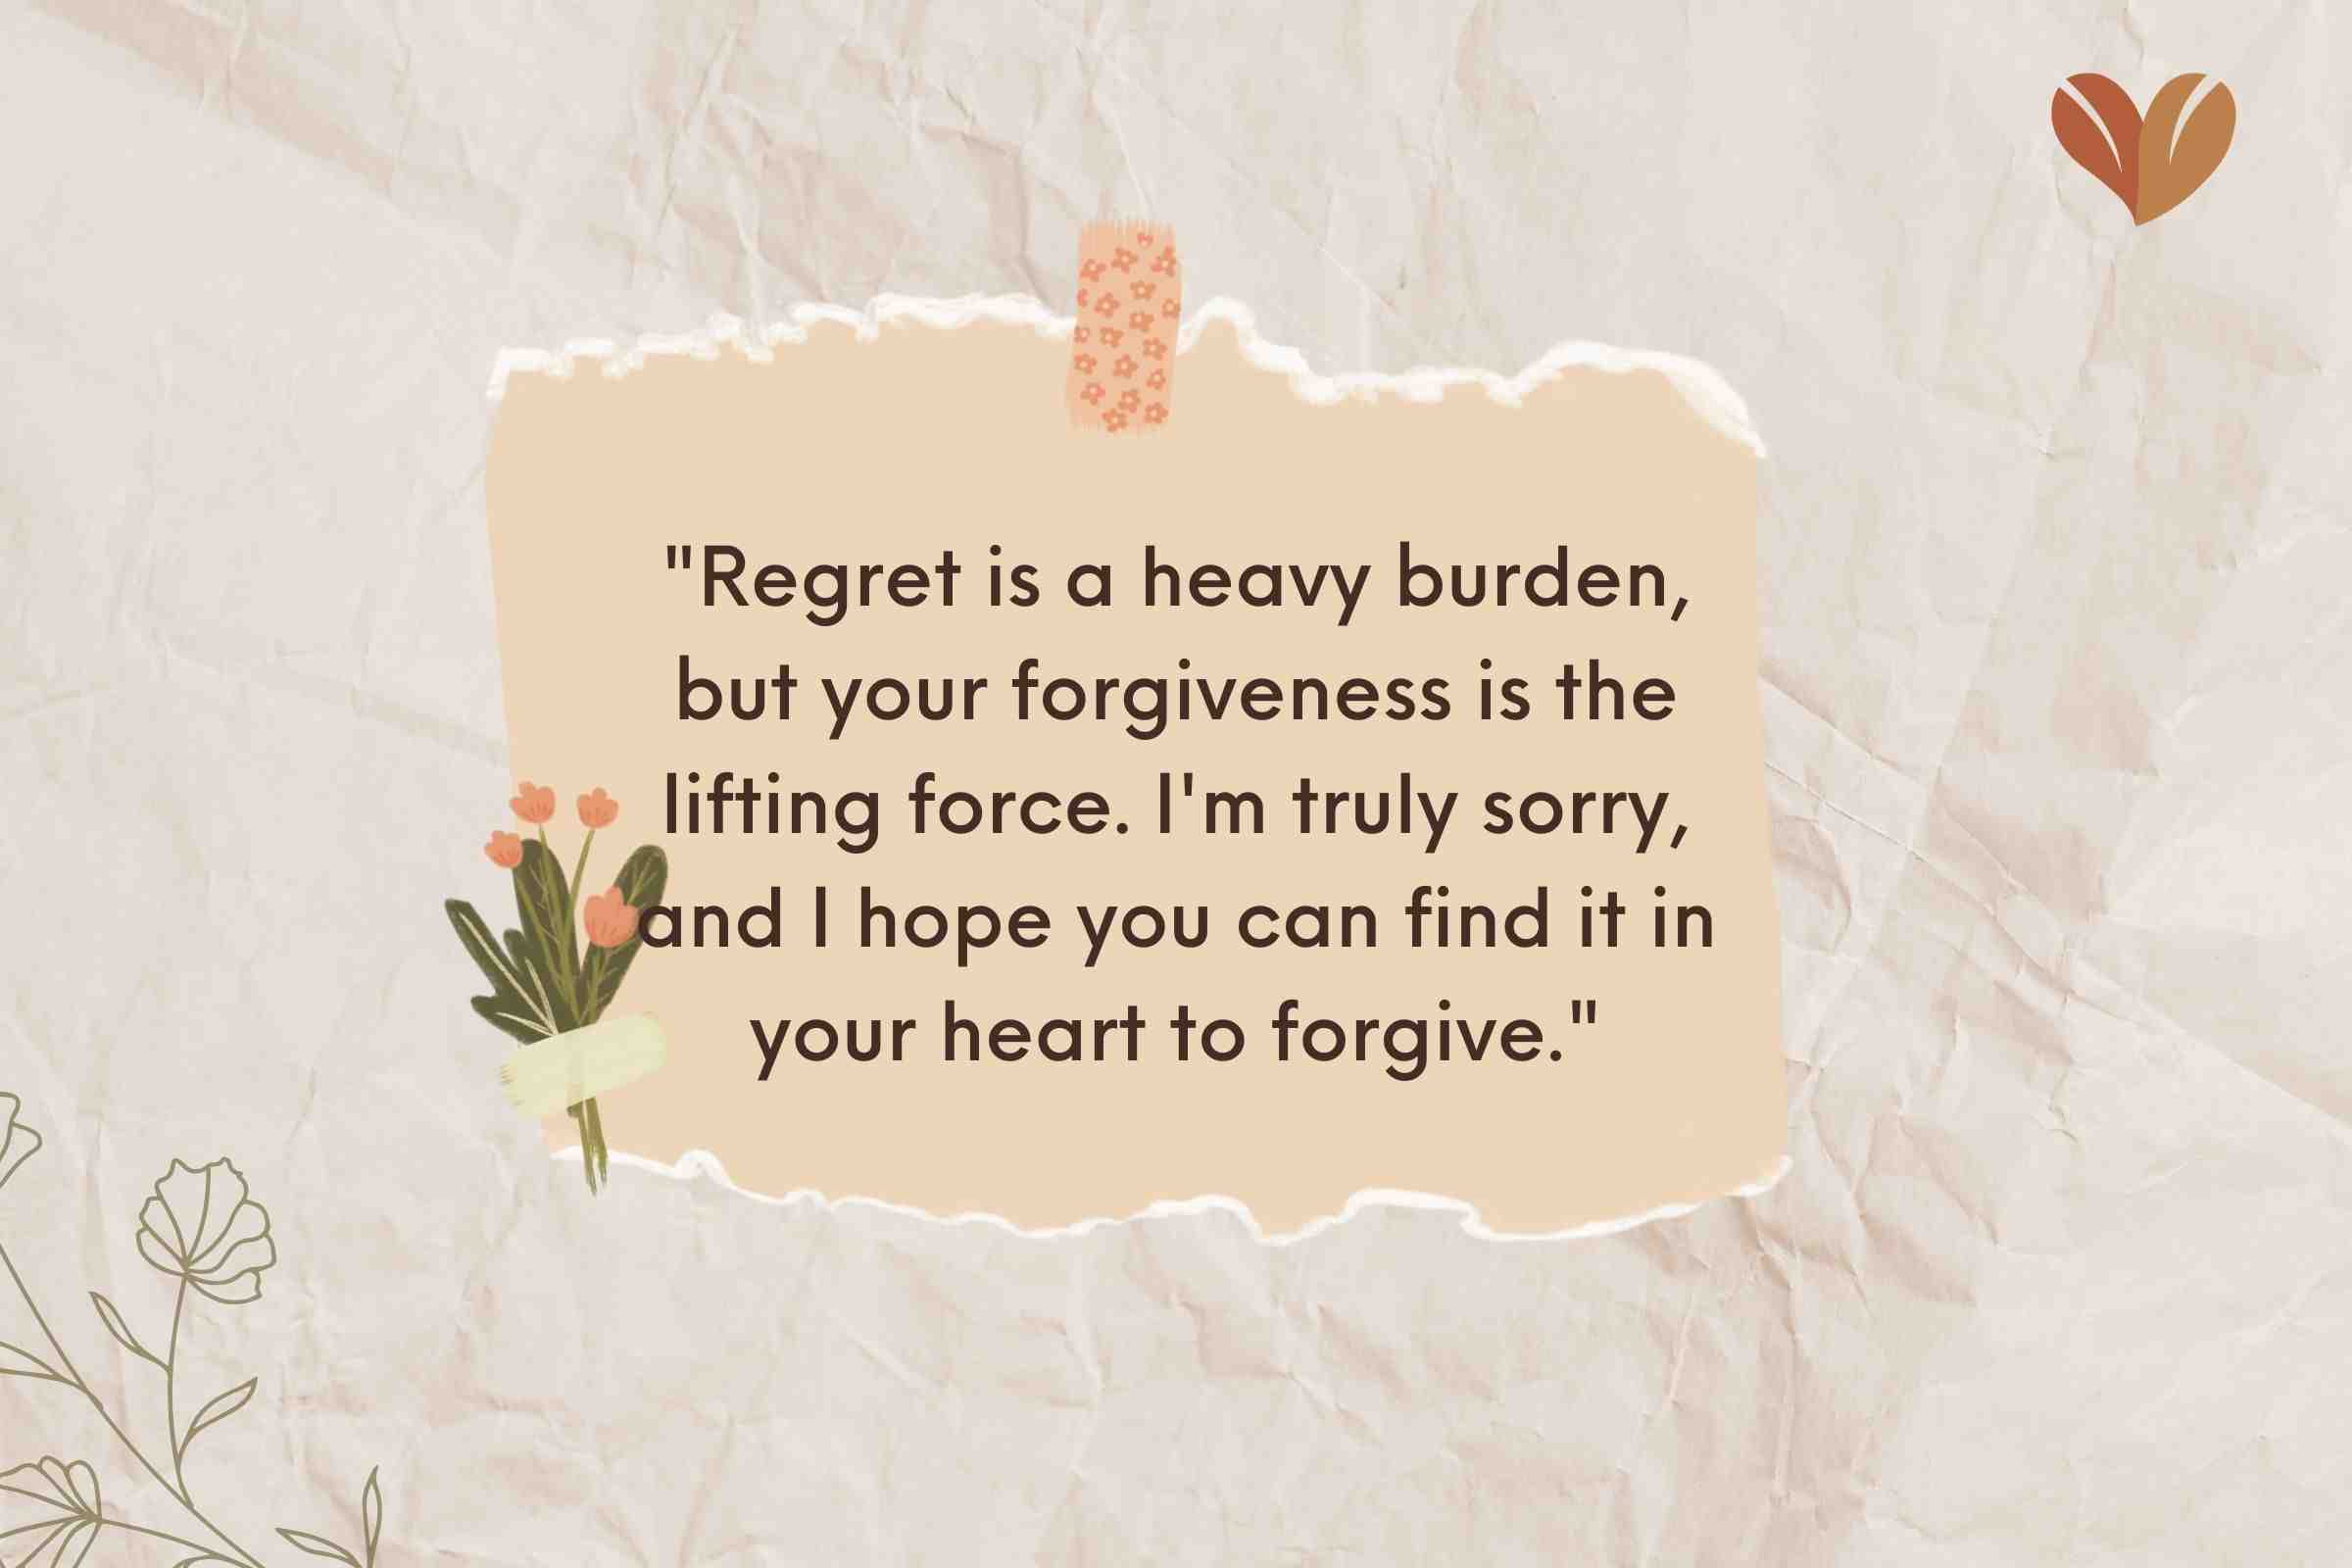 "Regret is a heavy burden, but your forgiveness is the lifting force. I'm truly sorry, and I hope you can find it in your heart to forgive."